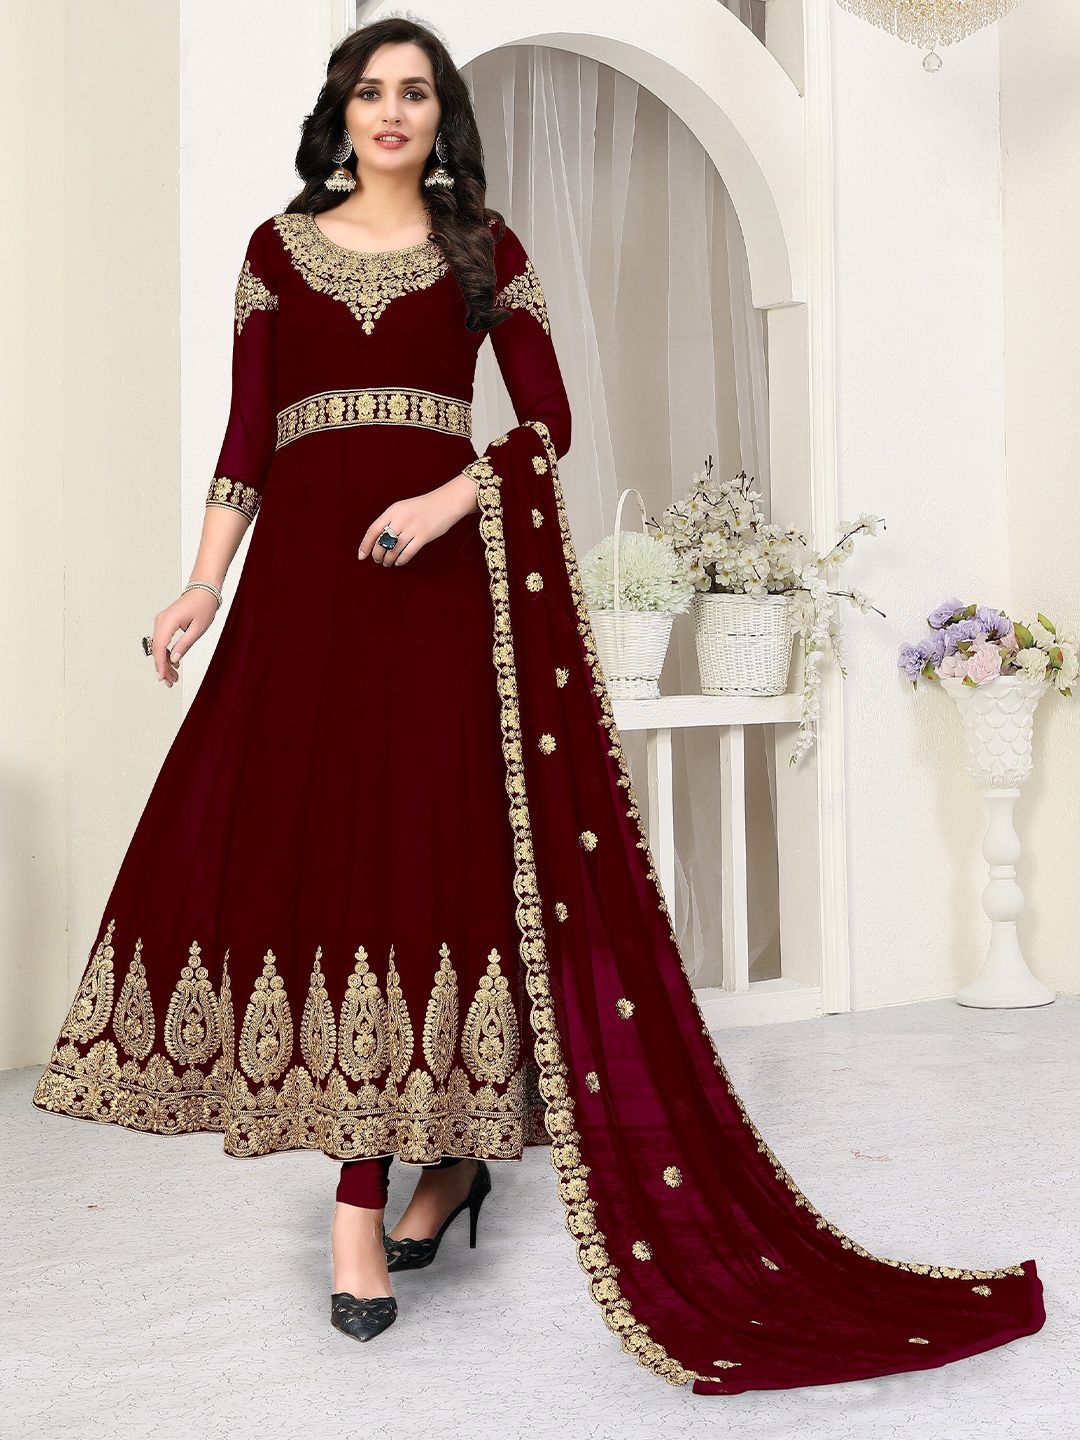 Divine International Trading Co Maroon & Gold-Toned Embroidered Unstitched Dress Material Price in India